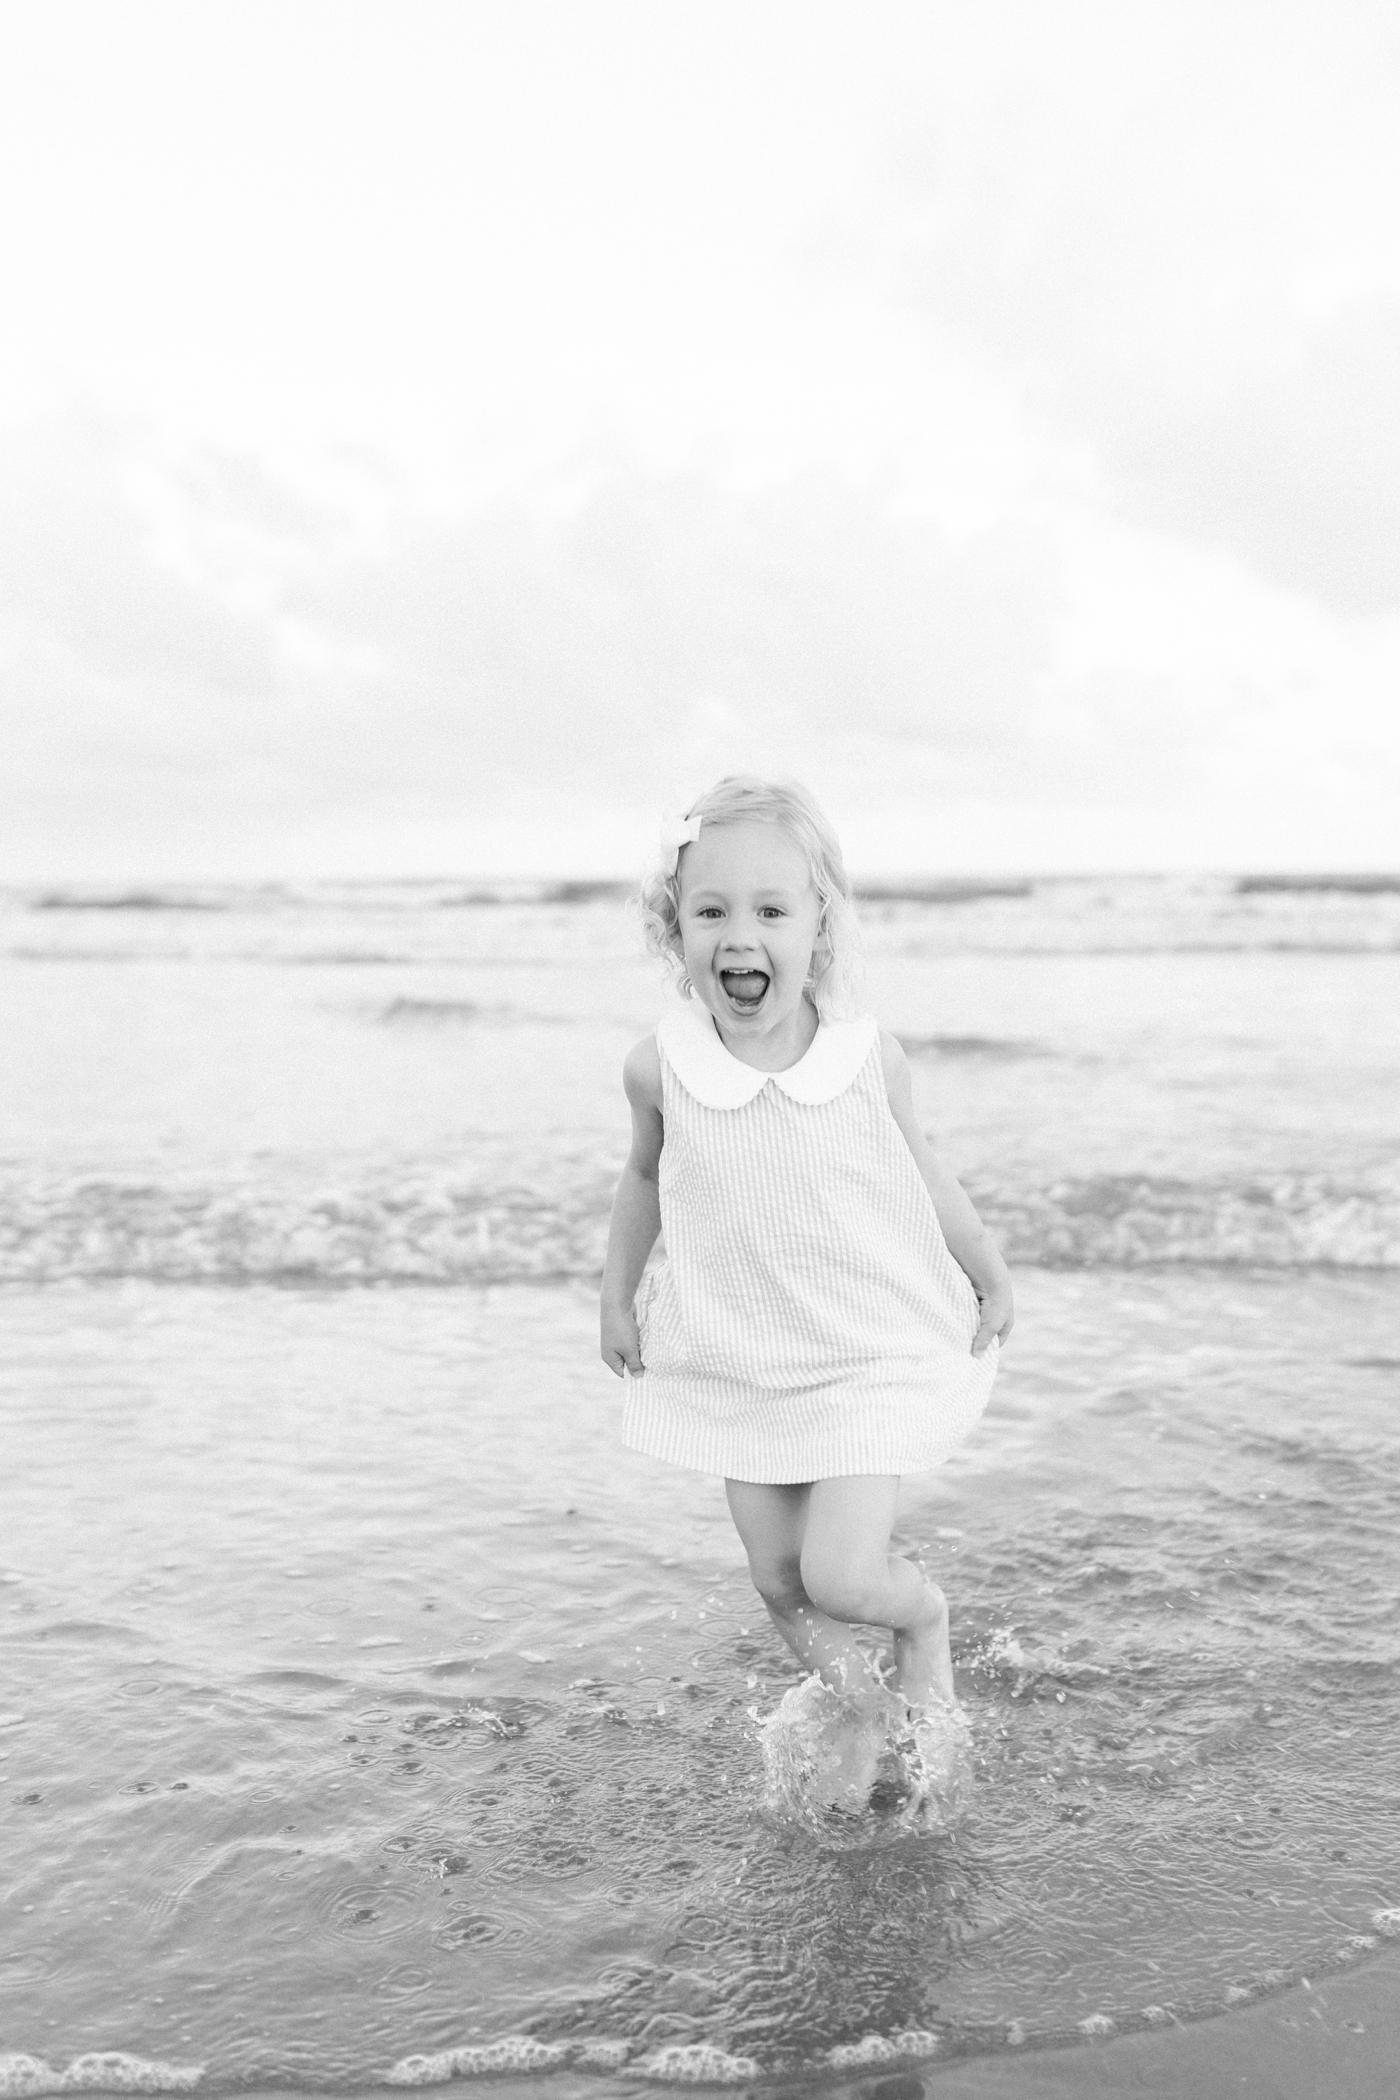 Little girl in striped dress playing in the ocean during isle of palms beach session| Photo by Caitlyn Motycka Photography.